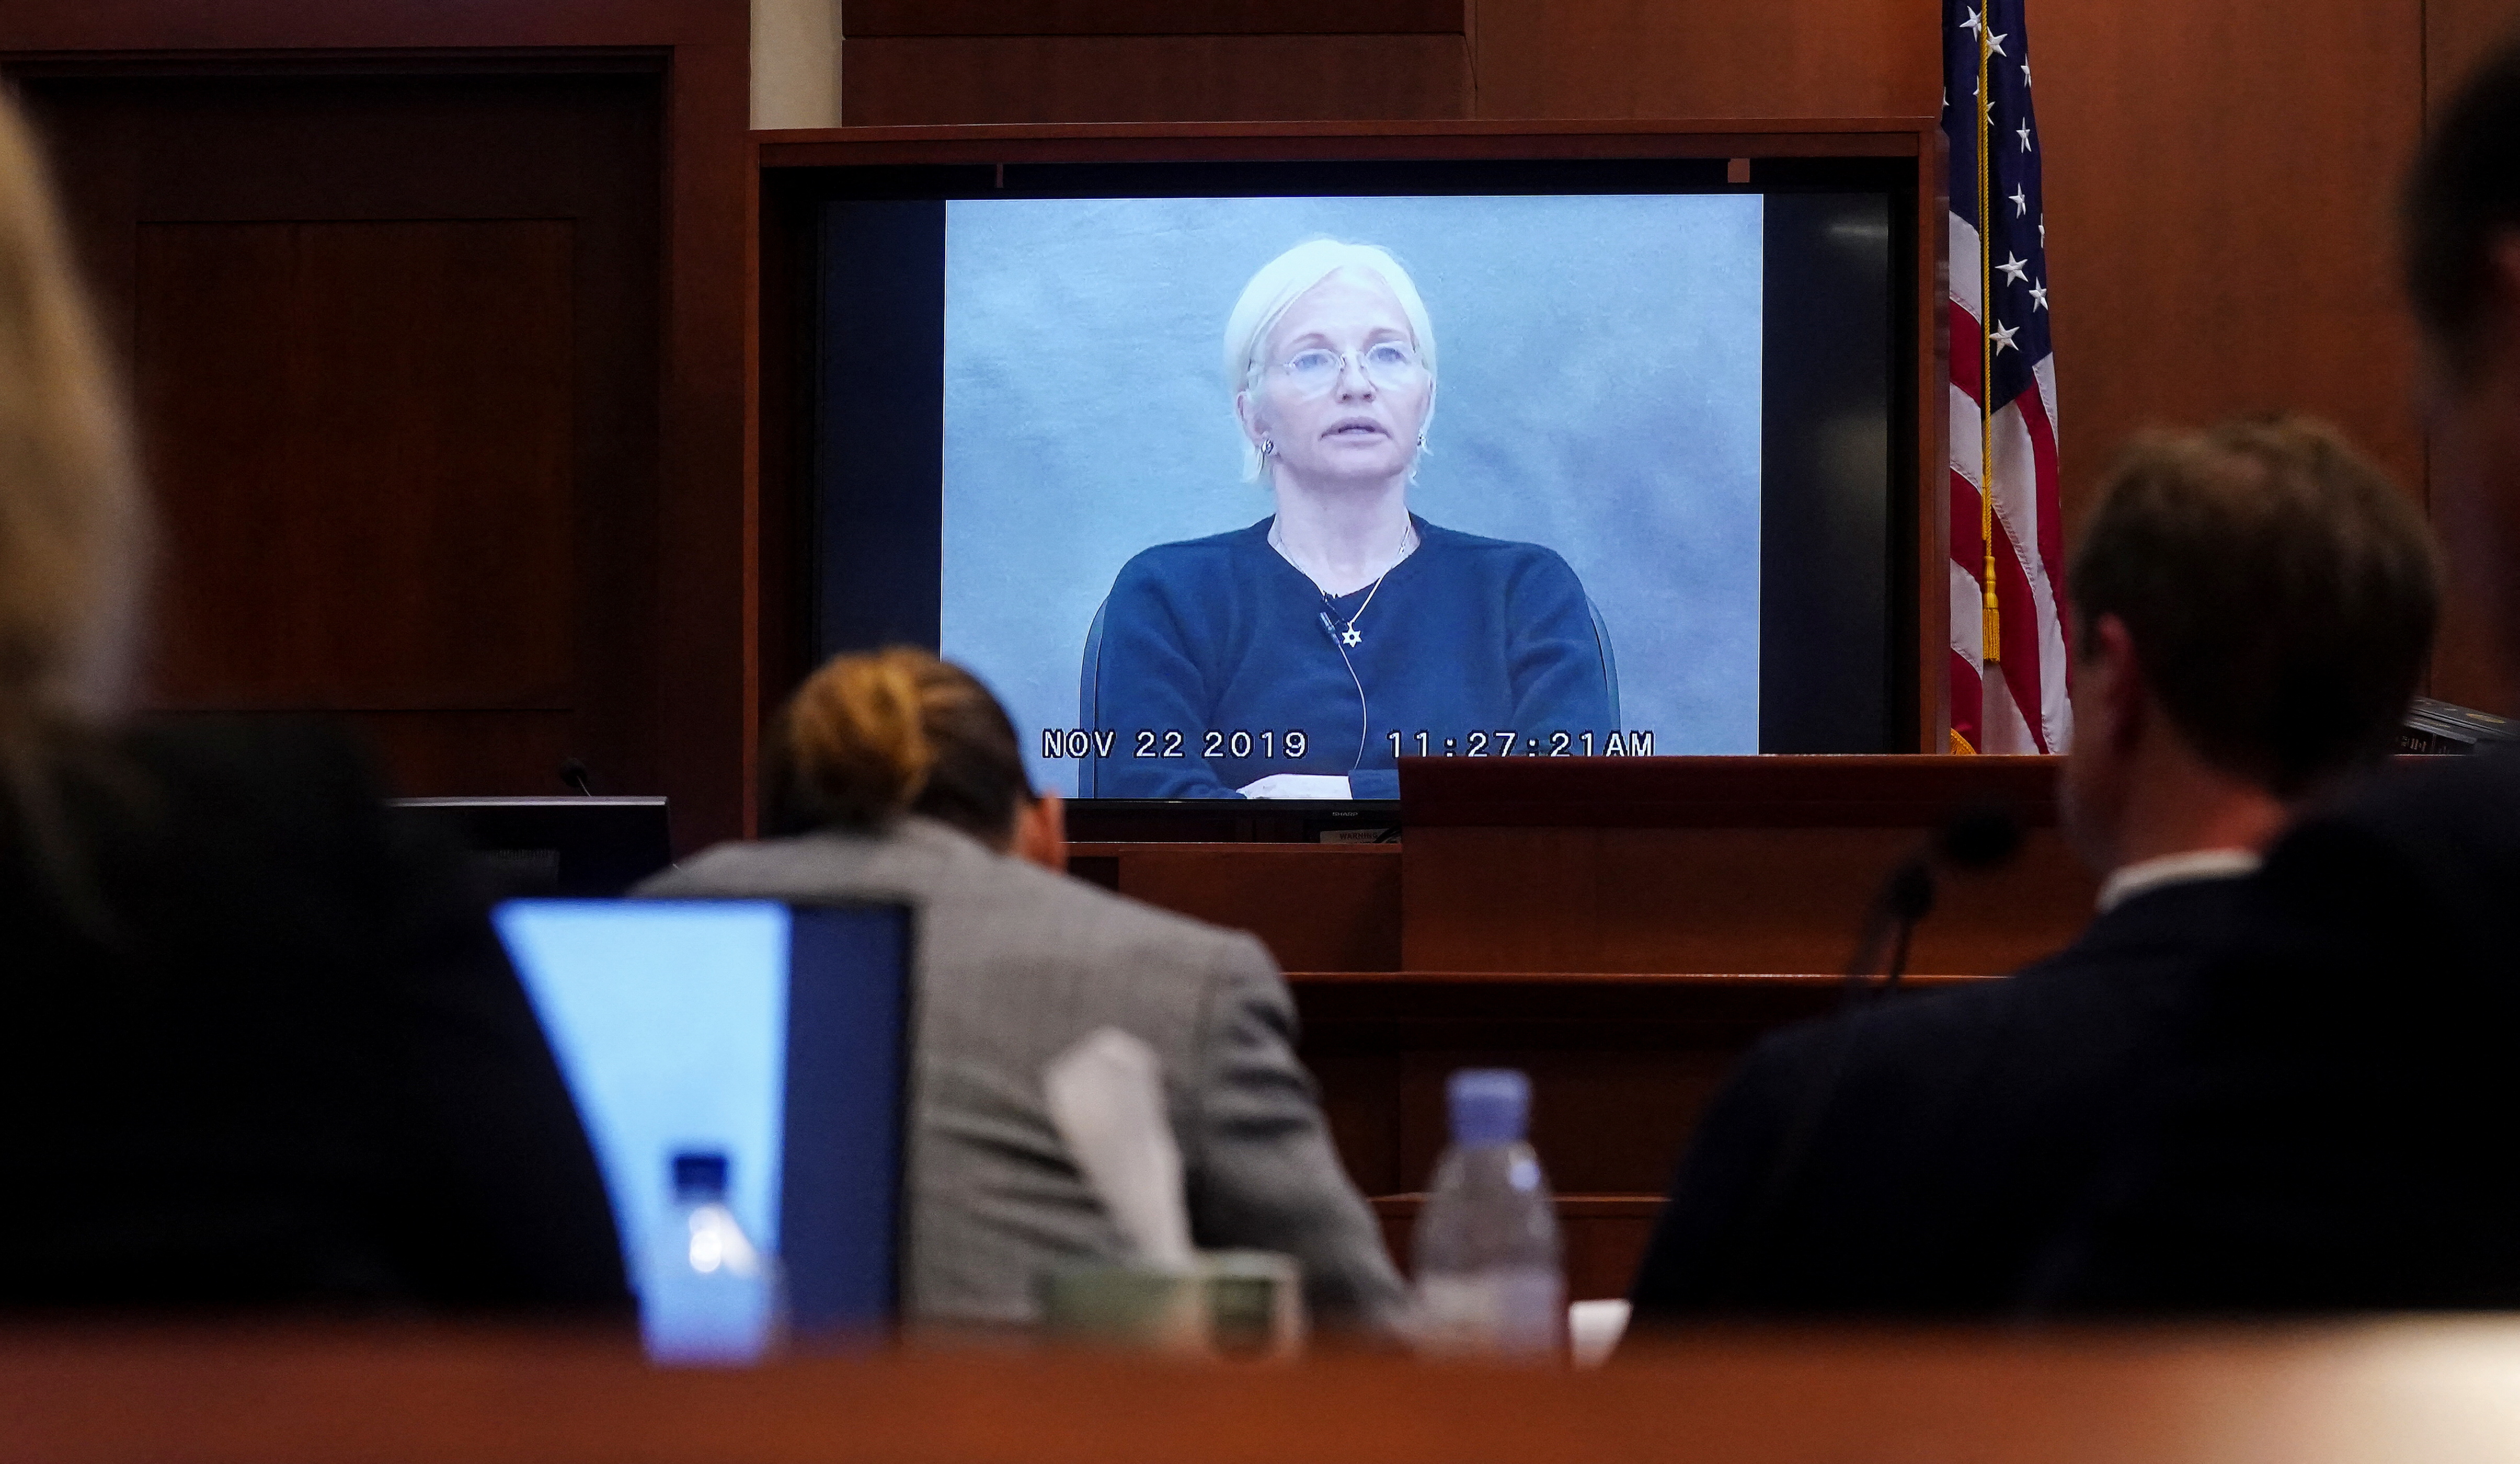 Ellen Barkin is seen on a monitor as recorded testimony from 2019 is played during Johnny Depp's libel trial against his ex-wife, actress Amber Heard, in Fairfax, Virginia May 19, 2022 (Reuters)